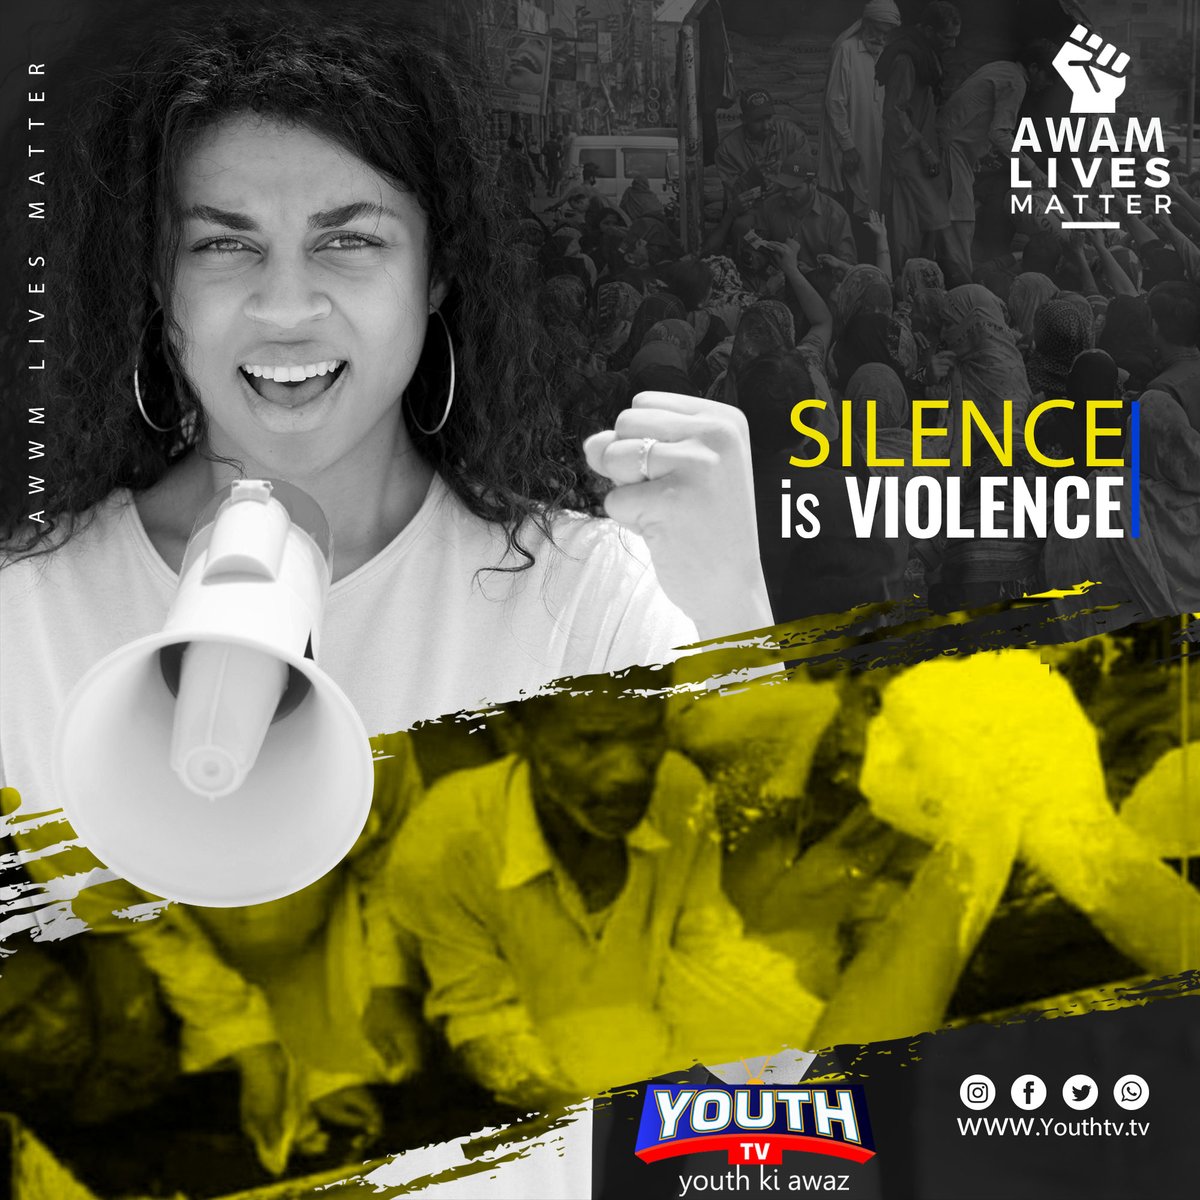 Silence is Violence. Speak now against injustice #NoCommentZeroReach #YouthTV